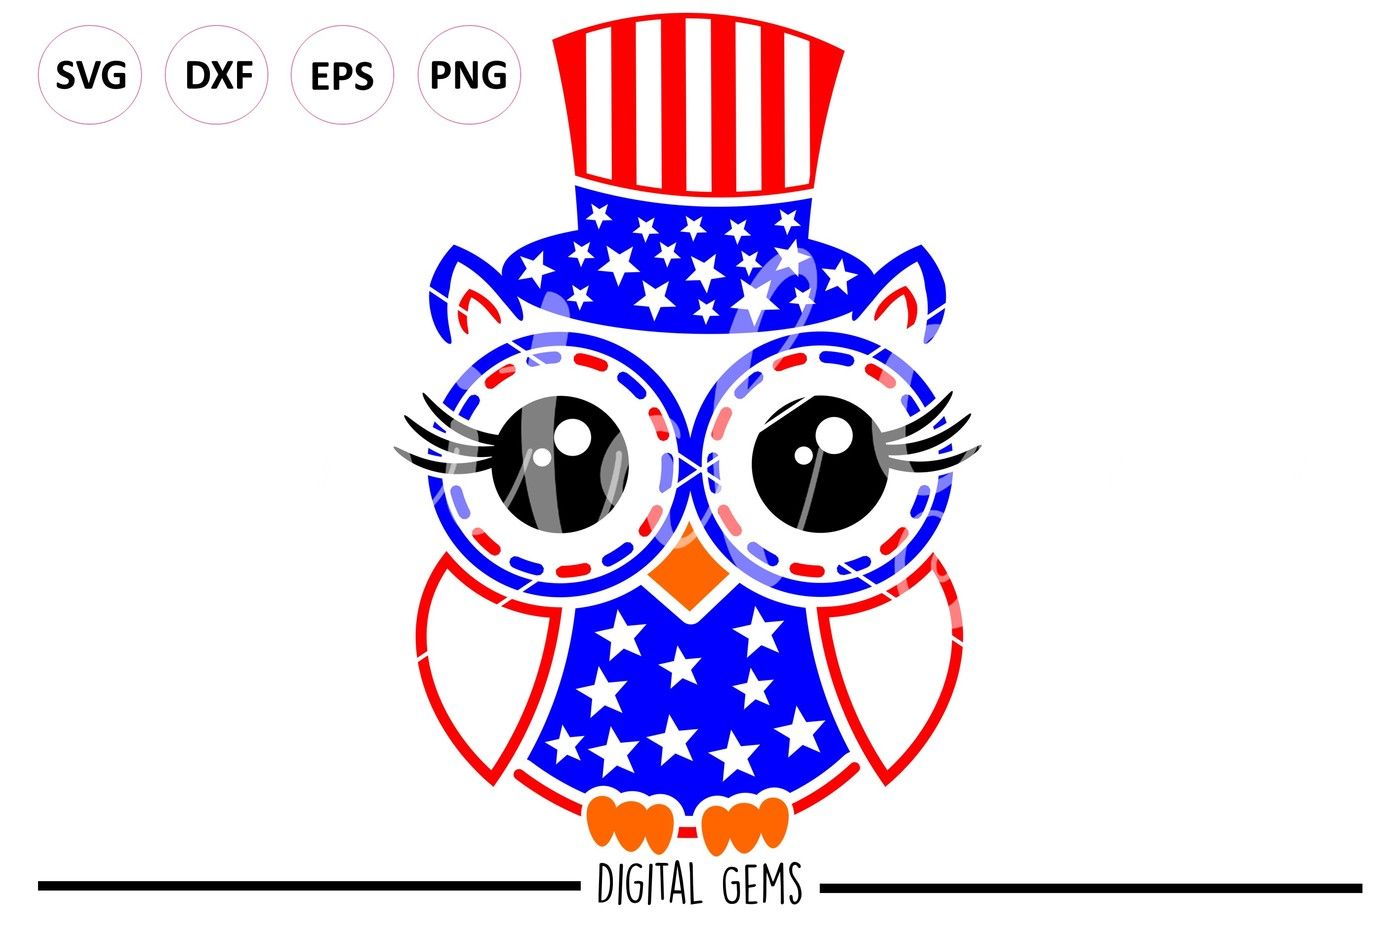 Owl July 4th SVG / DXF / EPS / PNG files By Digital Gems